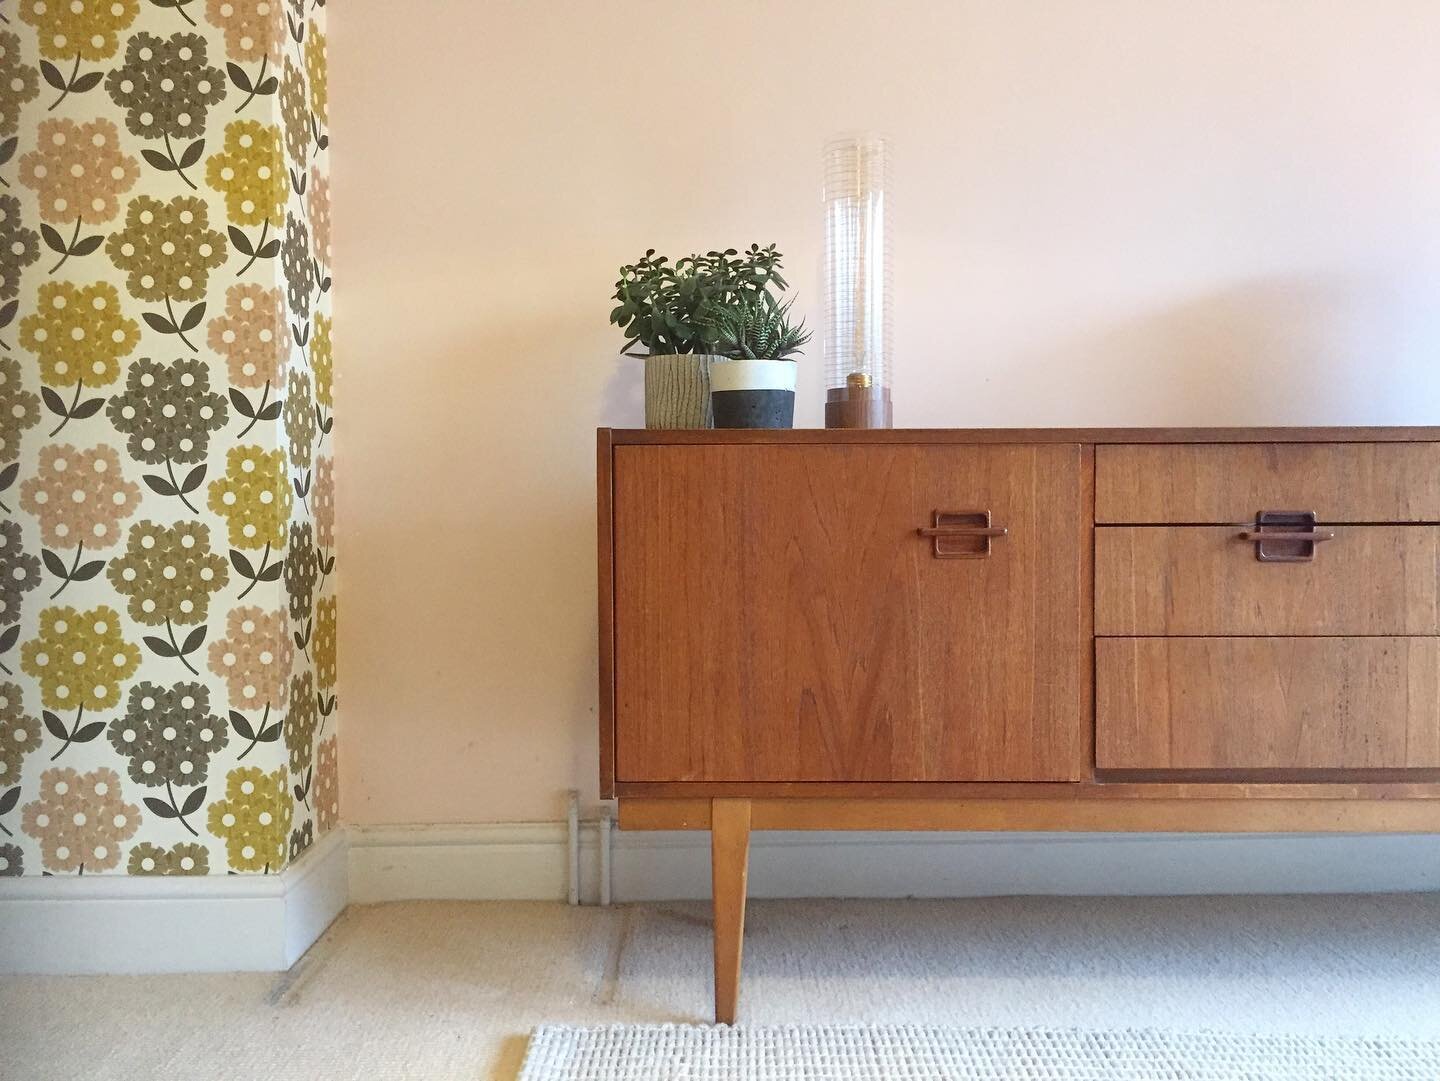 One week after @paperdollshandmade Christmas market and my lovely customers Rob &amp; Alison have kindly sent me a photo of their Luna Classic Lamp on their mid century sideboard, sitting pretty amongst their gorgeous interior setting. Thank you both